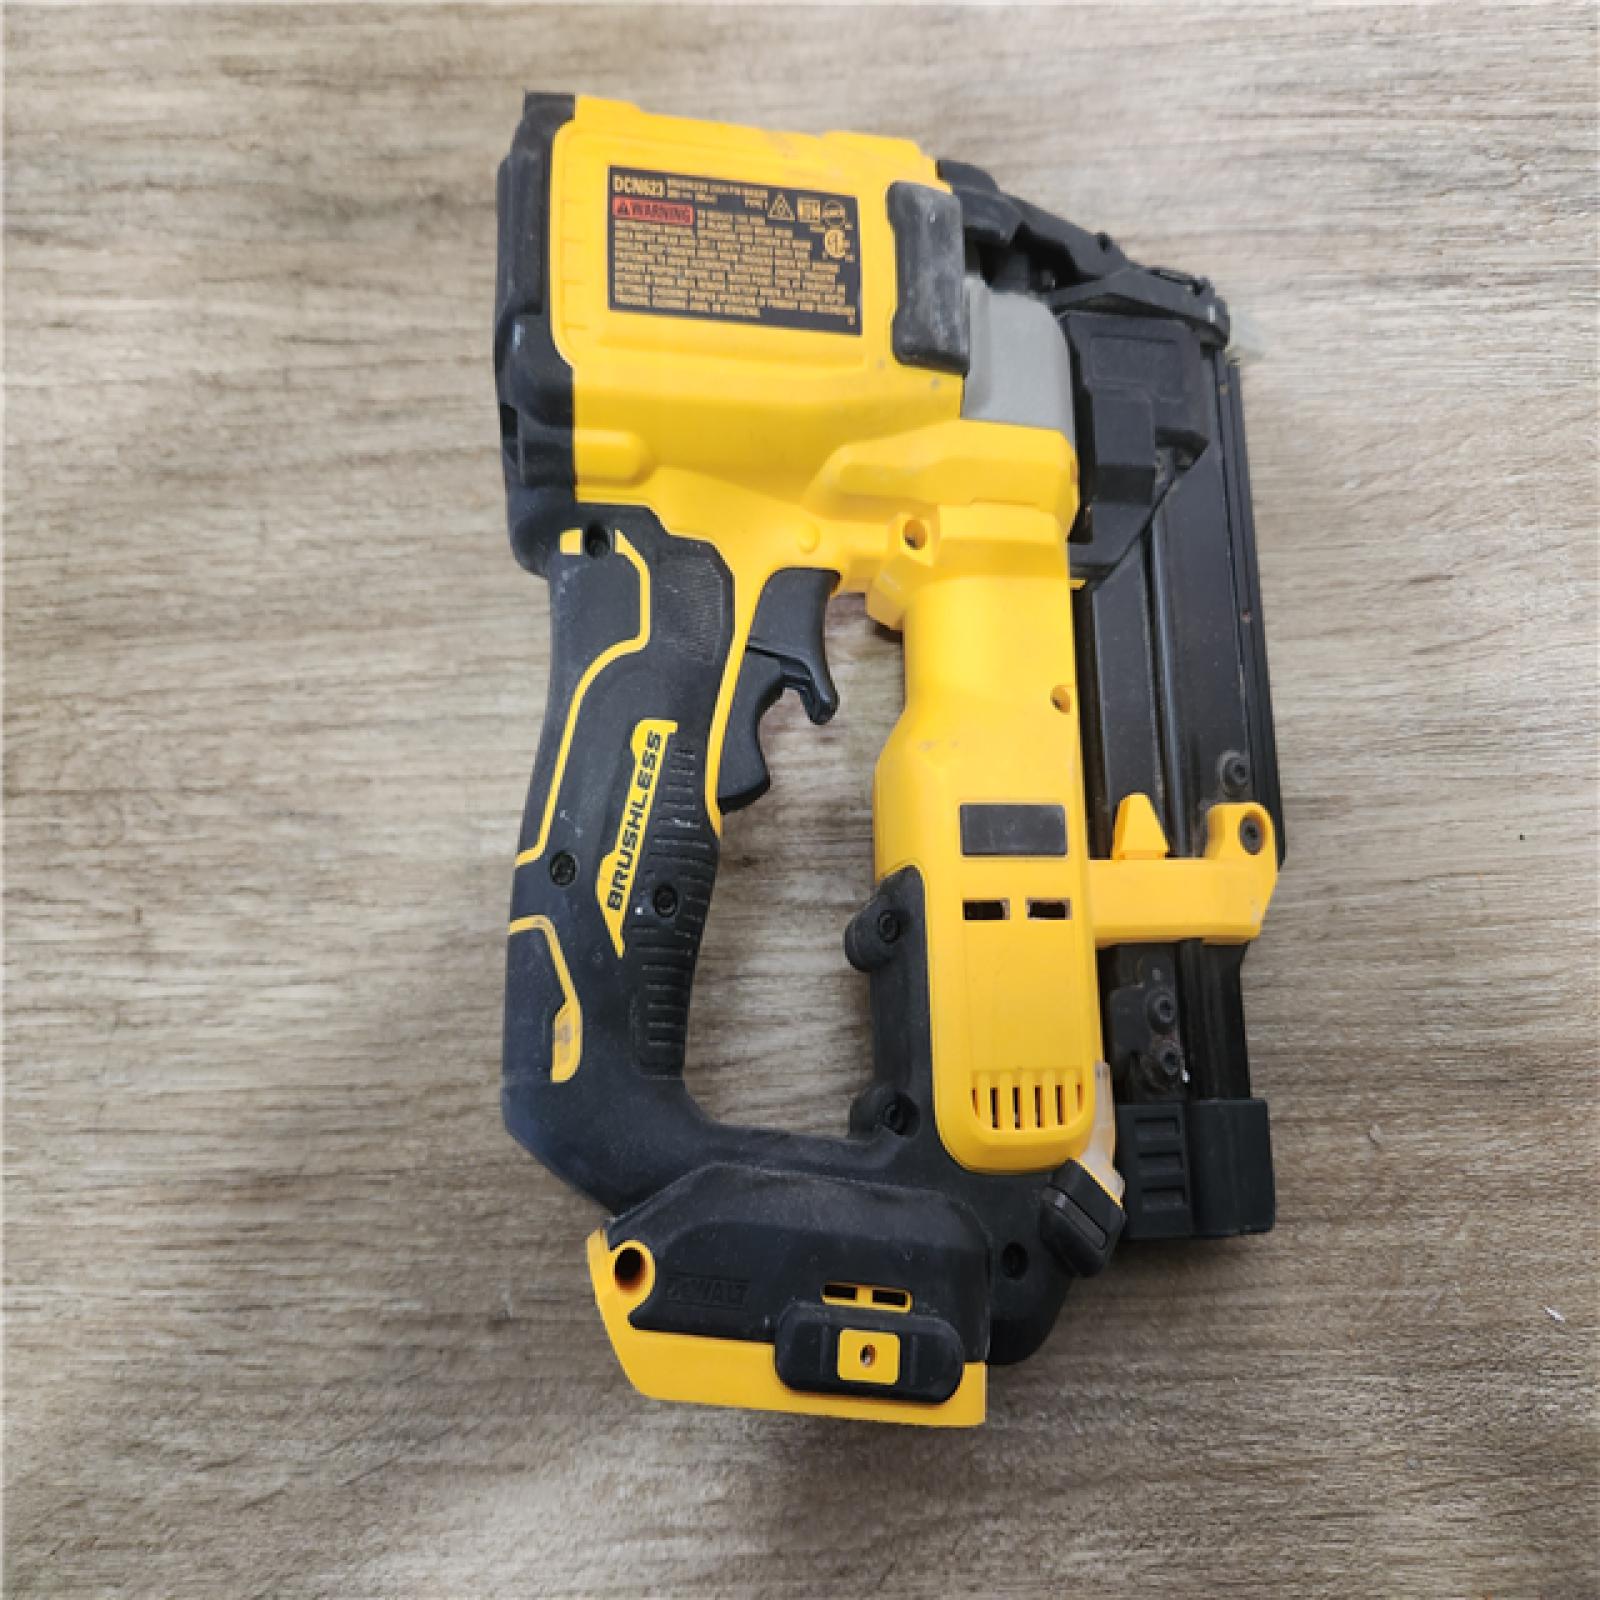 Phoenix Location NEW DEWALT ATOMIC 20V MAX Lithium Ion Cordless 23 Gauge Pin Nailer Kit with 2.0Ah Battery and Charger